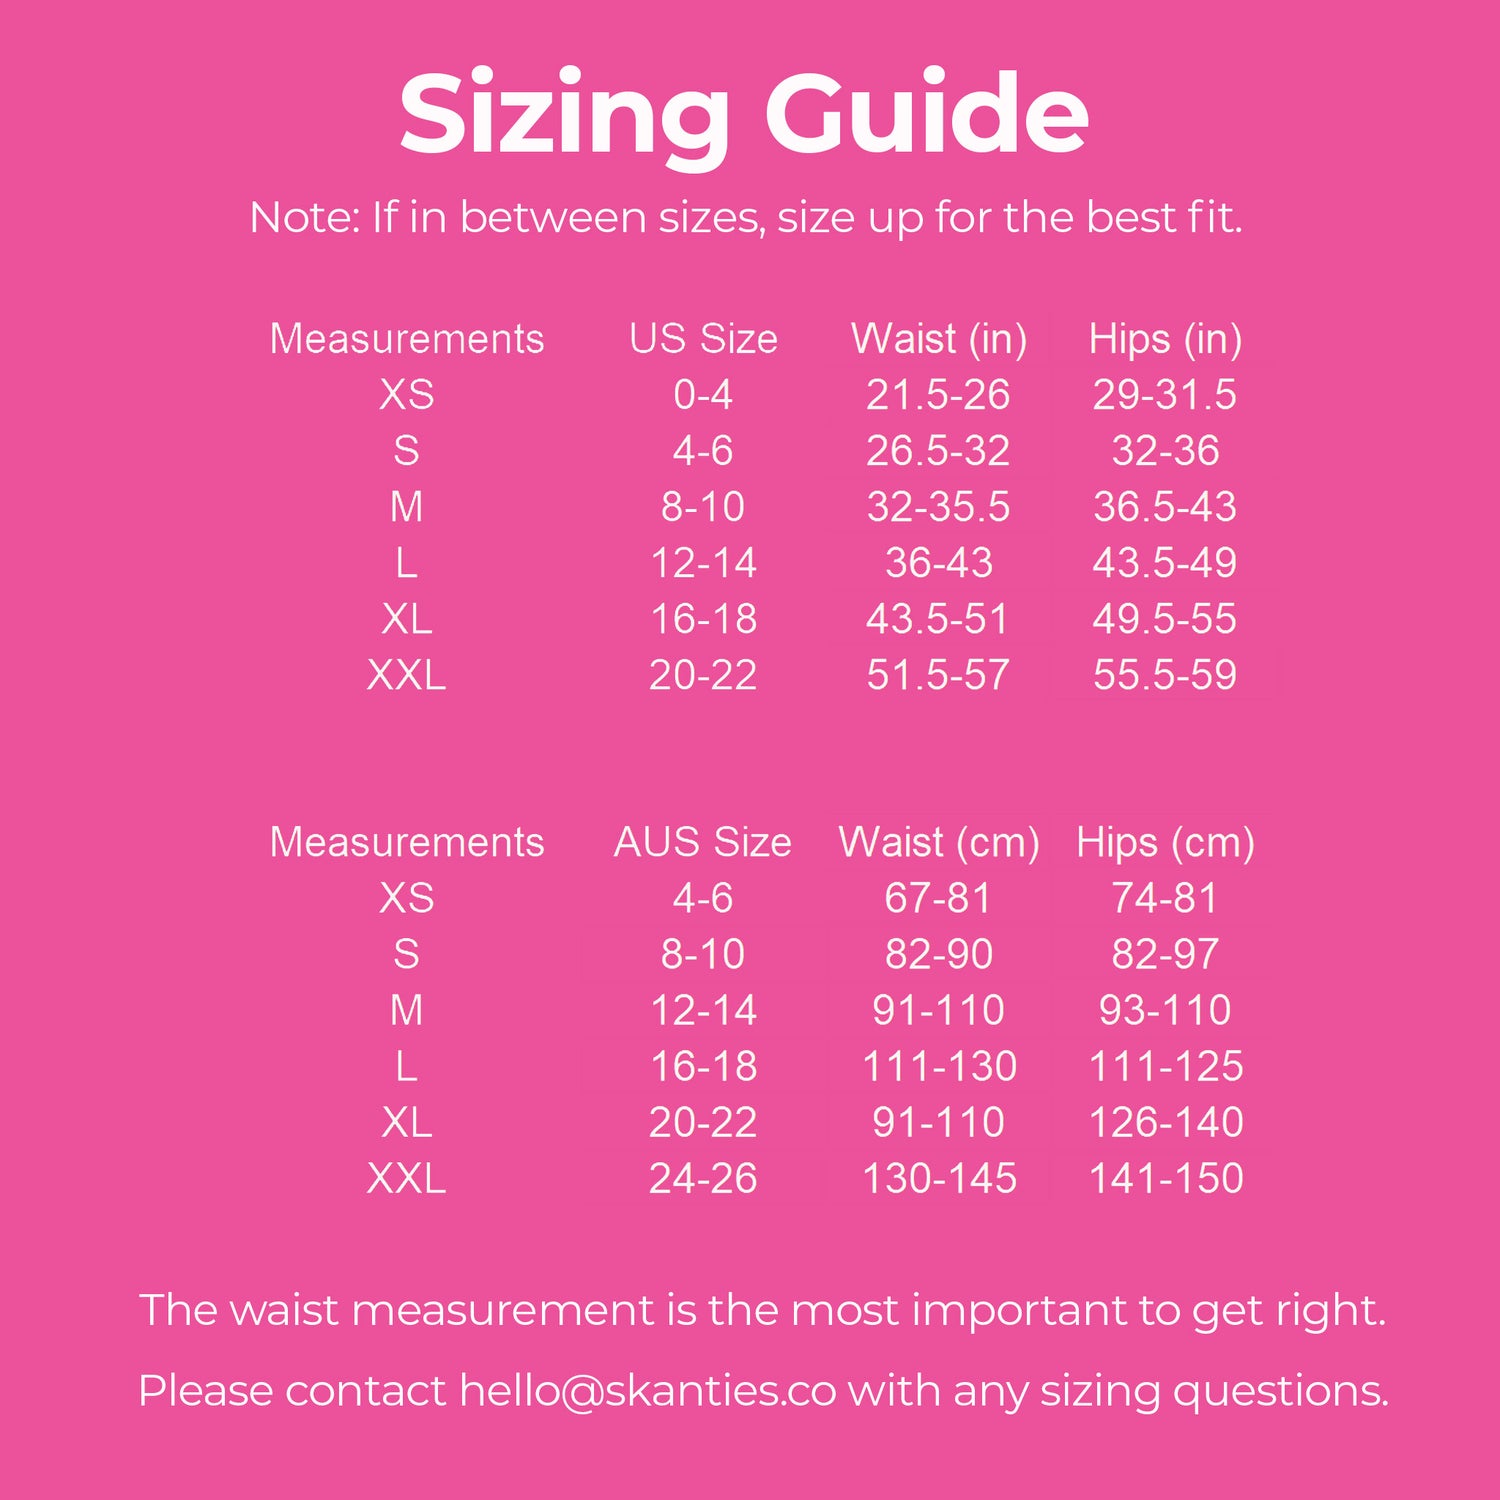 Sizing Guide Size Guide (US Dress Sizes) XS = 0-4, S = 4-6, M = 8-10, L = 12-14, XL = 16-18, XXL = 20-22 (AUS Dress Sizes) XS = 4-6, S =8-10, M =12-14, L = 16-18, XL =20-22, XXL =24-26 